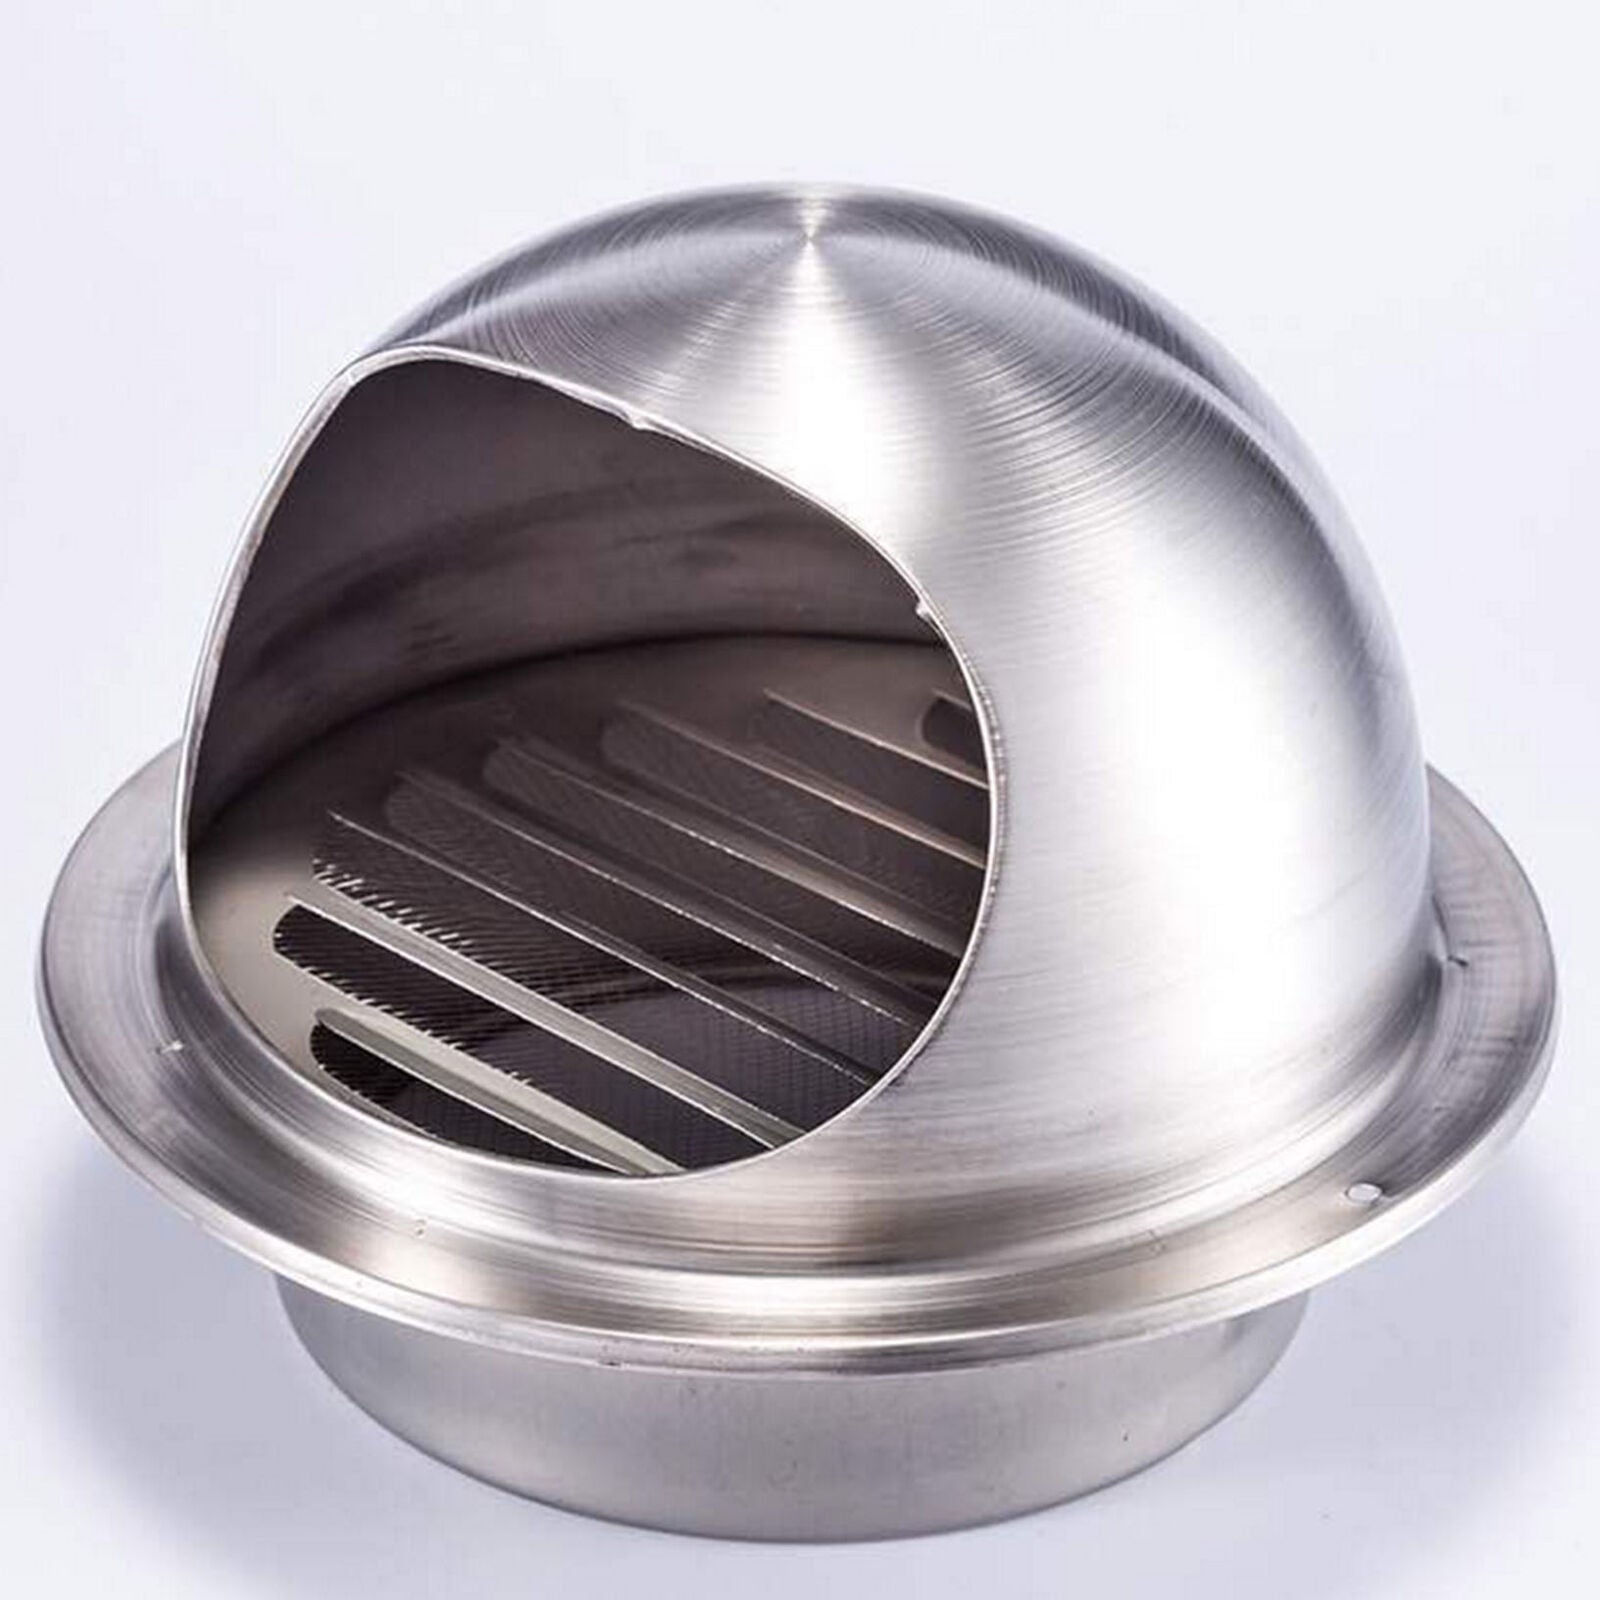 1pcs Stainless Steel Wall Ceiling Air Vent Ventilation Exhaust Duct Grille Cover